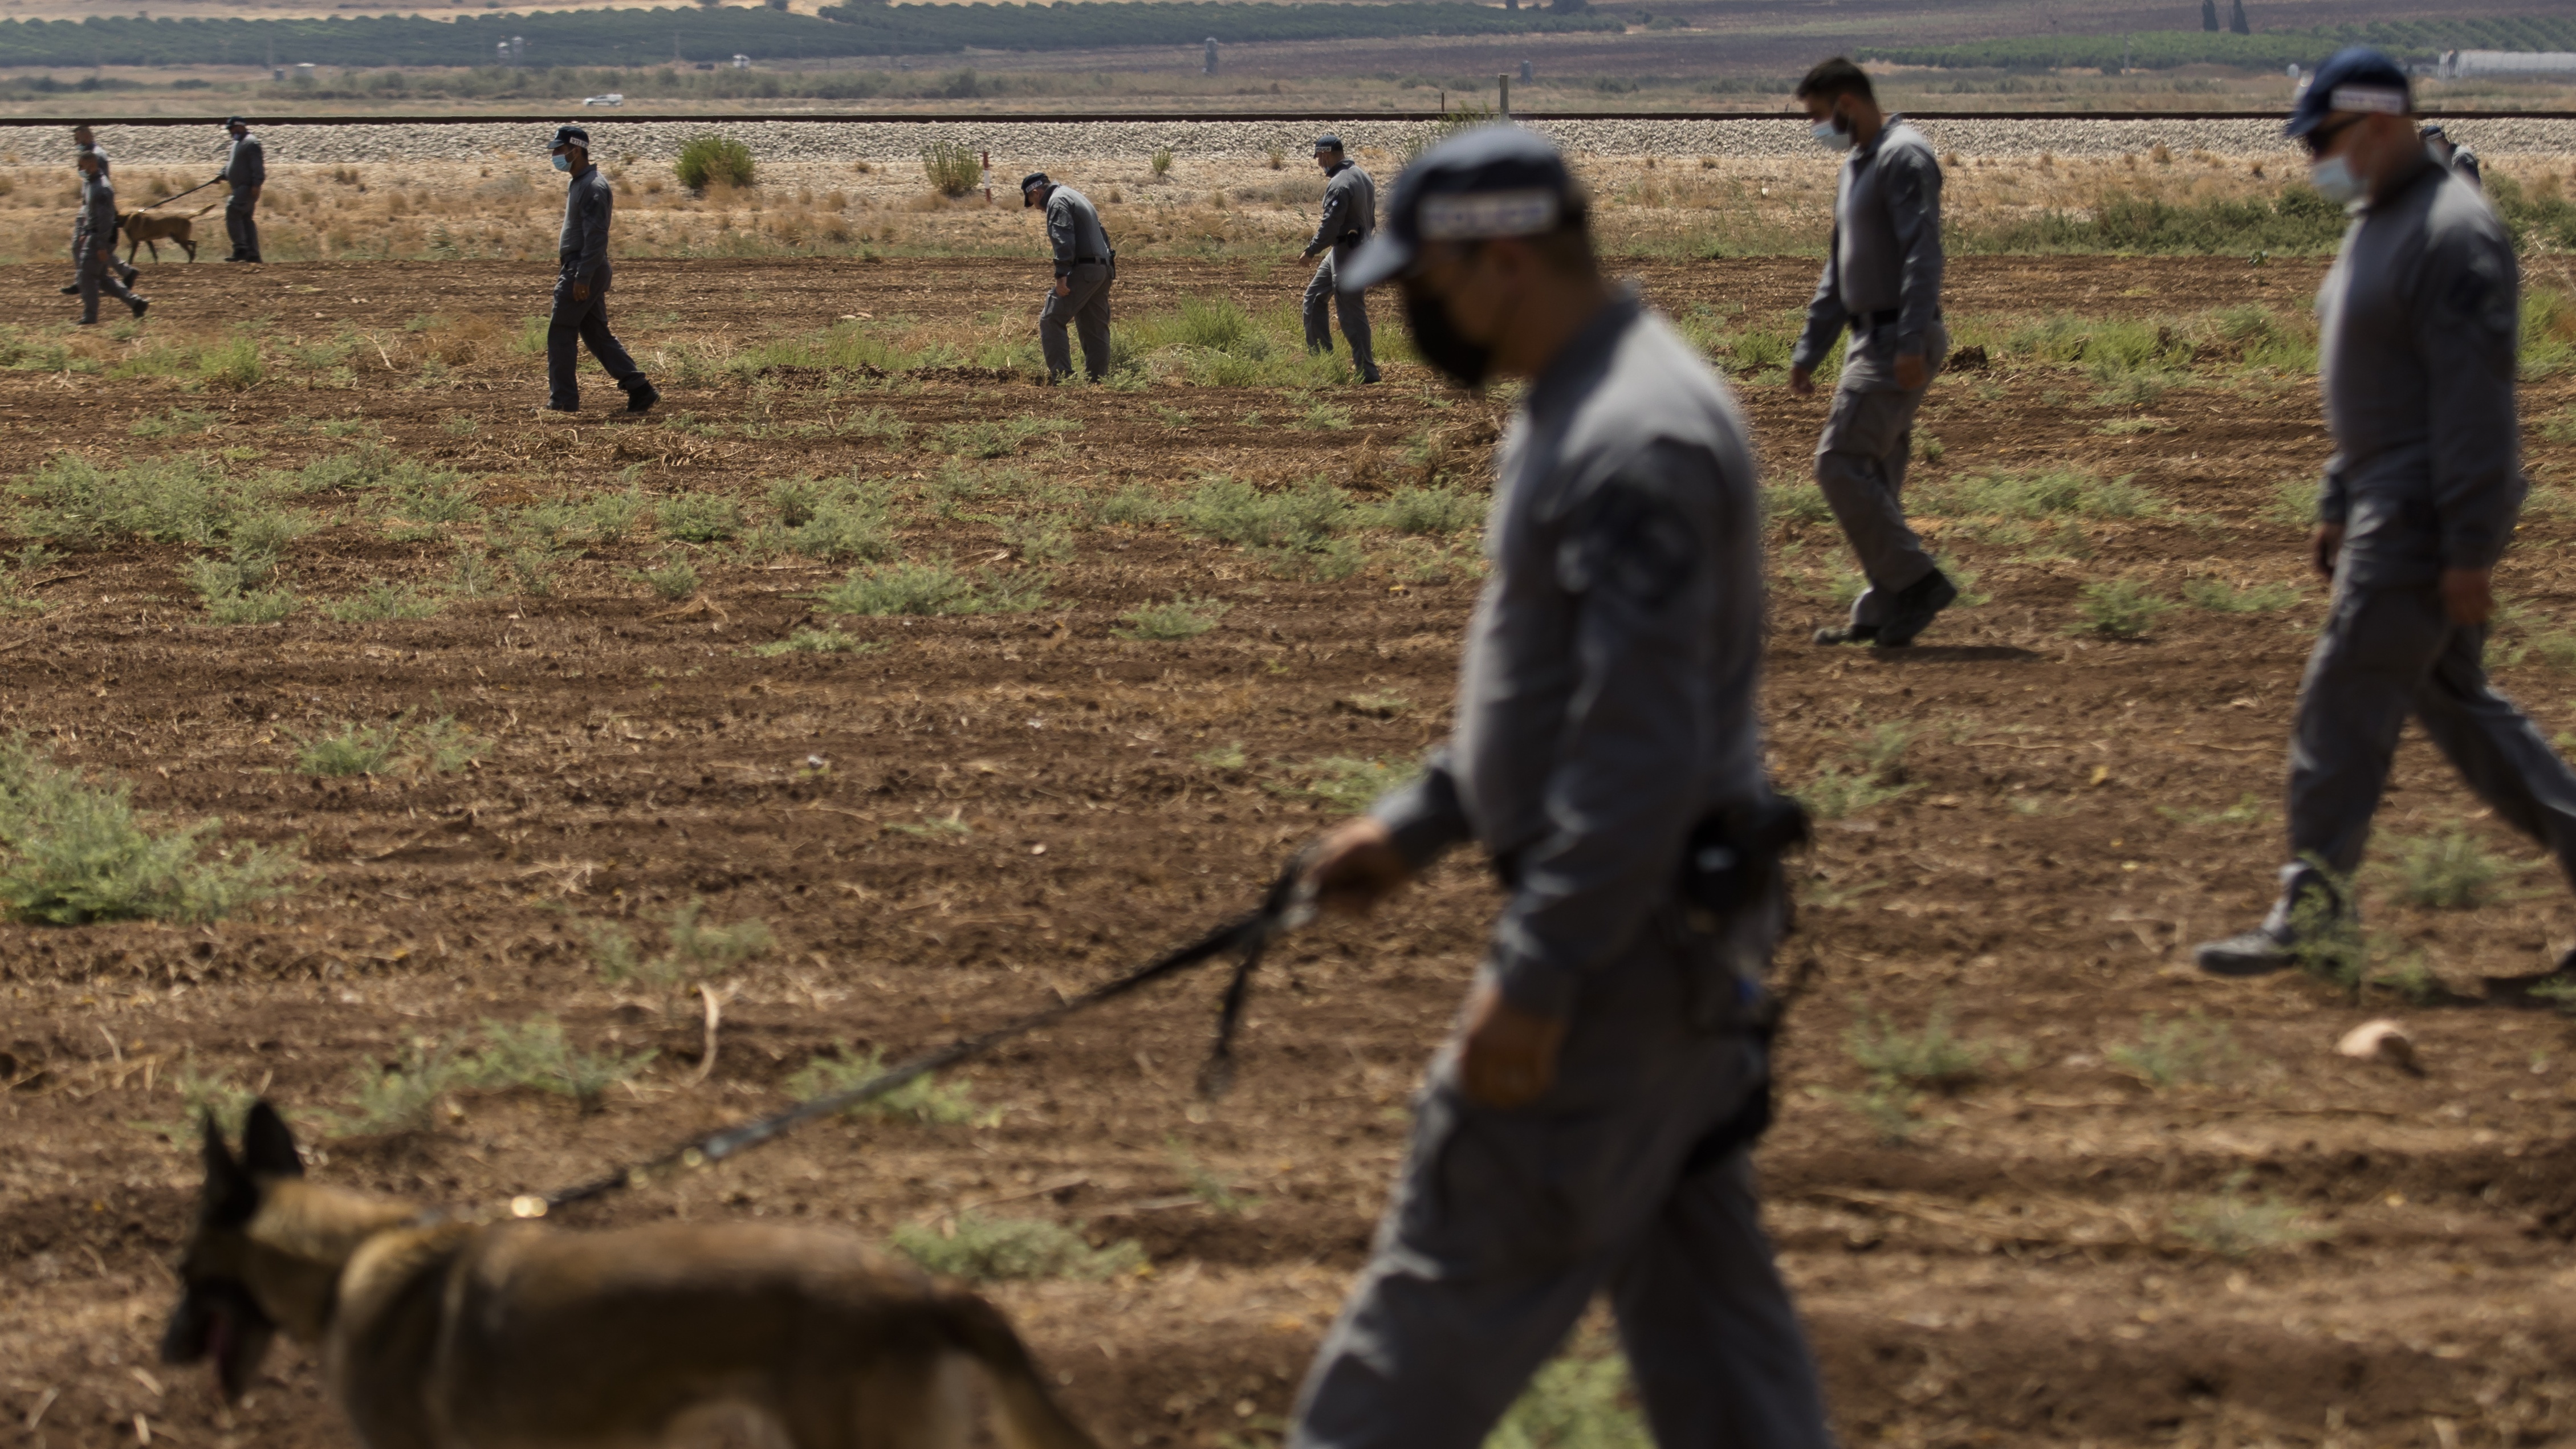 Israeli prison officers conduct a search after the break-out